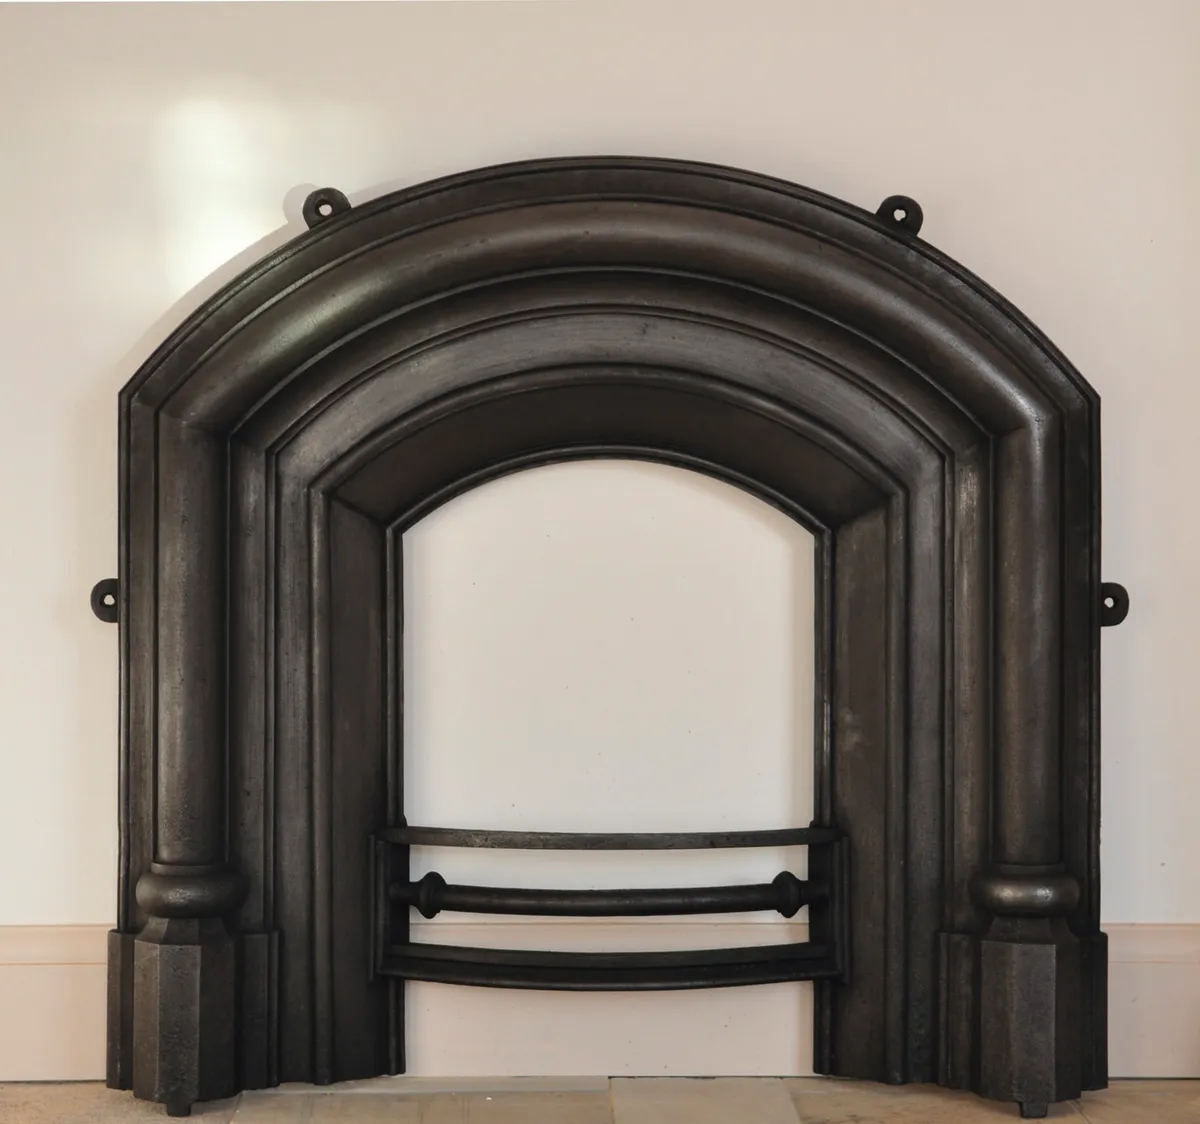 Antique Gothic cast-iron arched fireplace, approx mid 19th-century